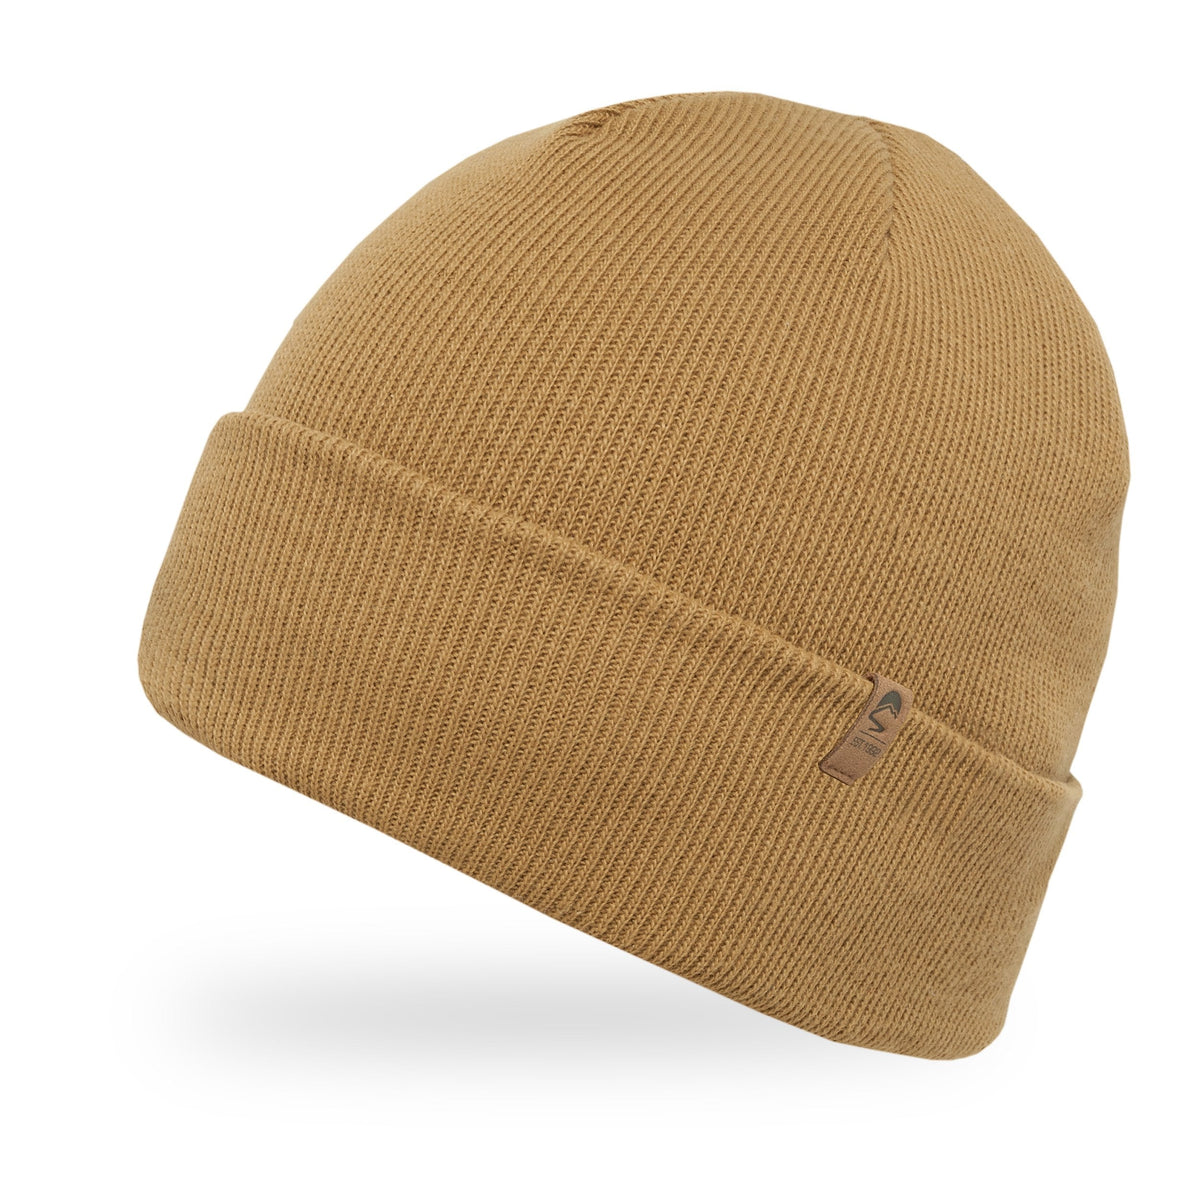 Neptune Beanie - SALE | Sunday Afternoons Canada